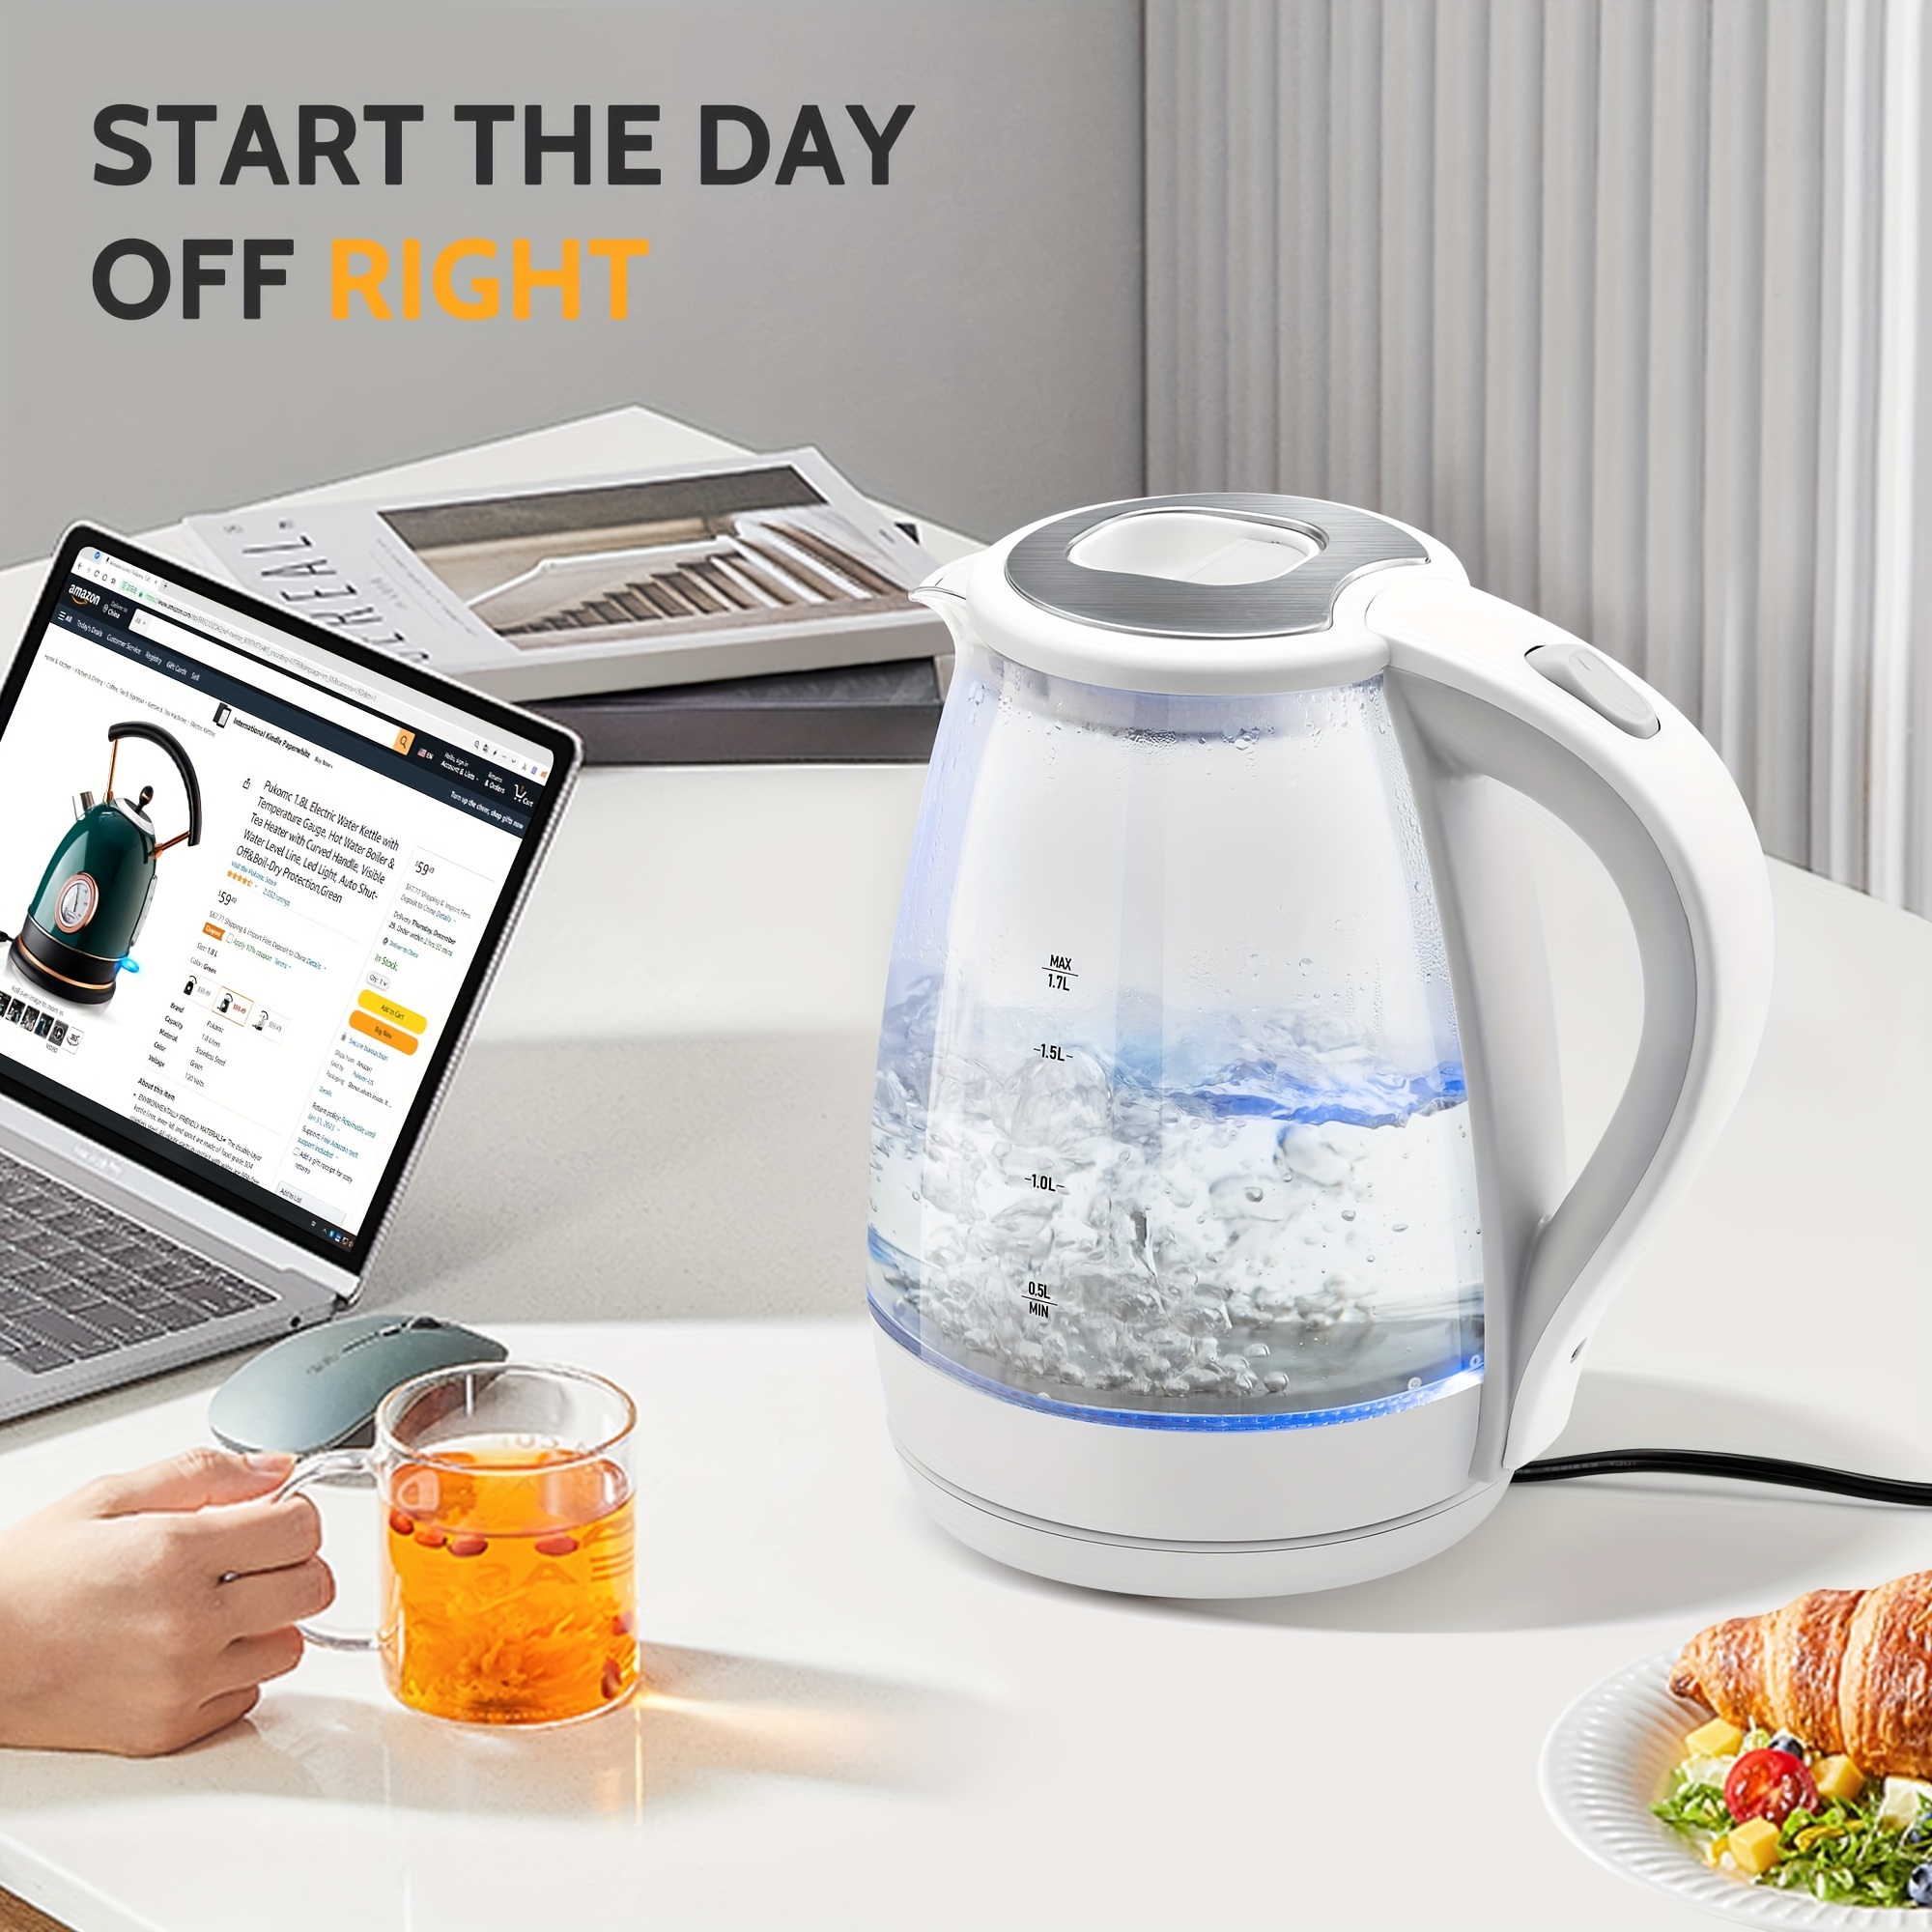 

Susteas Electric Kettle - 1.7l Hot Water Boiler - Glass Tea Kettle With Wide Opening And Led Indicator, Auto Shut-off And Boil-dry Protection